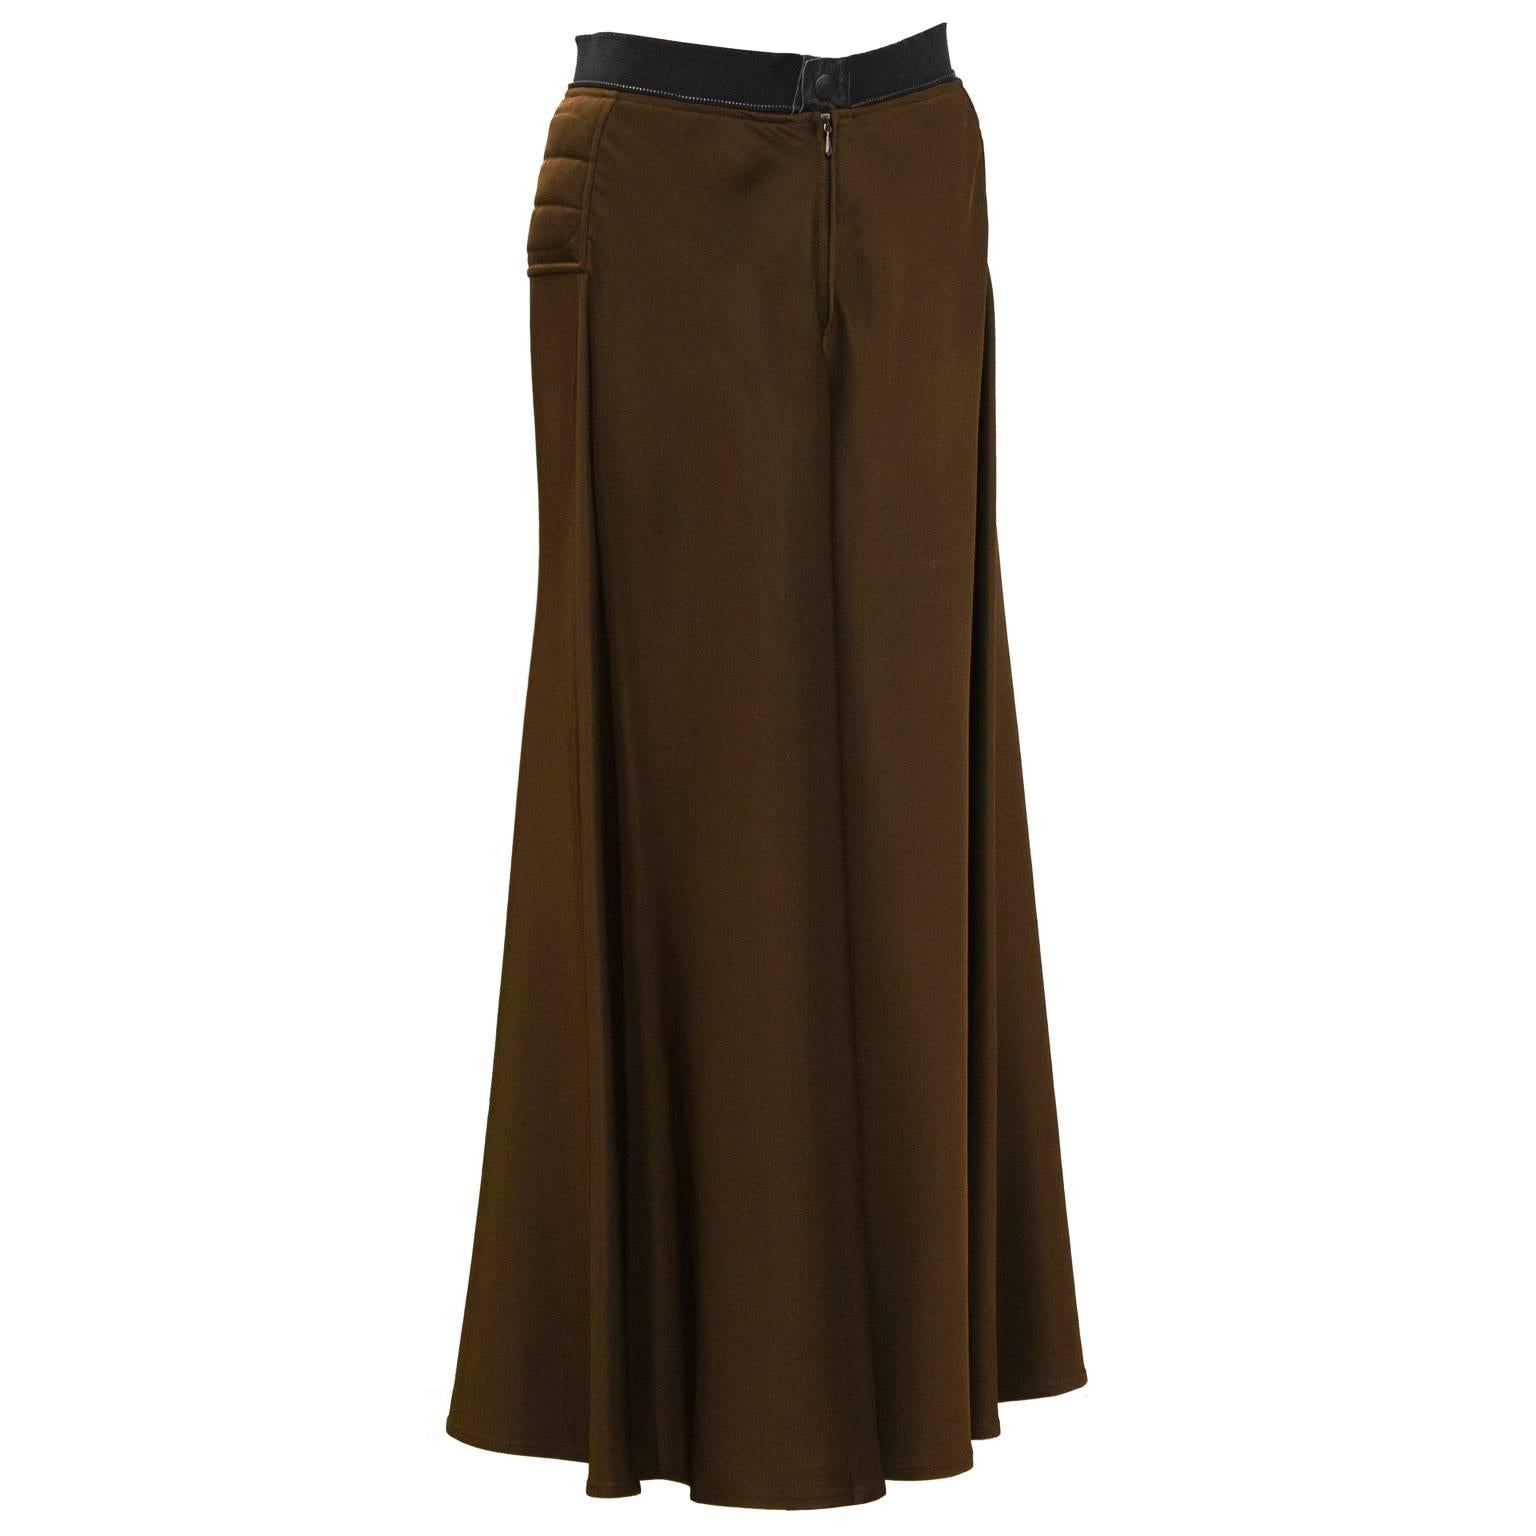 Early 2000's Gaultier brown maxi skirt.  Horizontal quilting details on the hips with a pant style front button and zipper closure. The cotton waistband is fashioned from a standard zipper showing the metal edge. In excellent condition. Fits like a